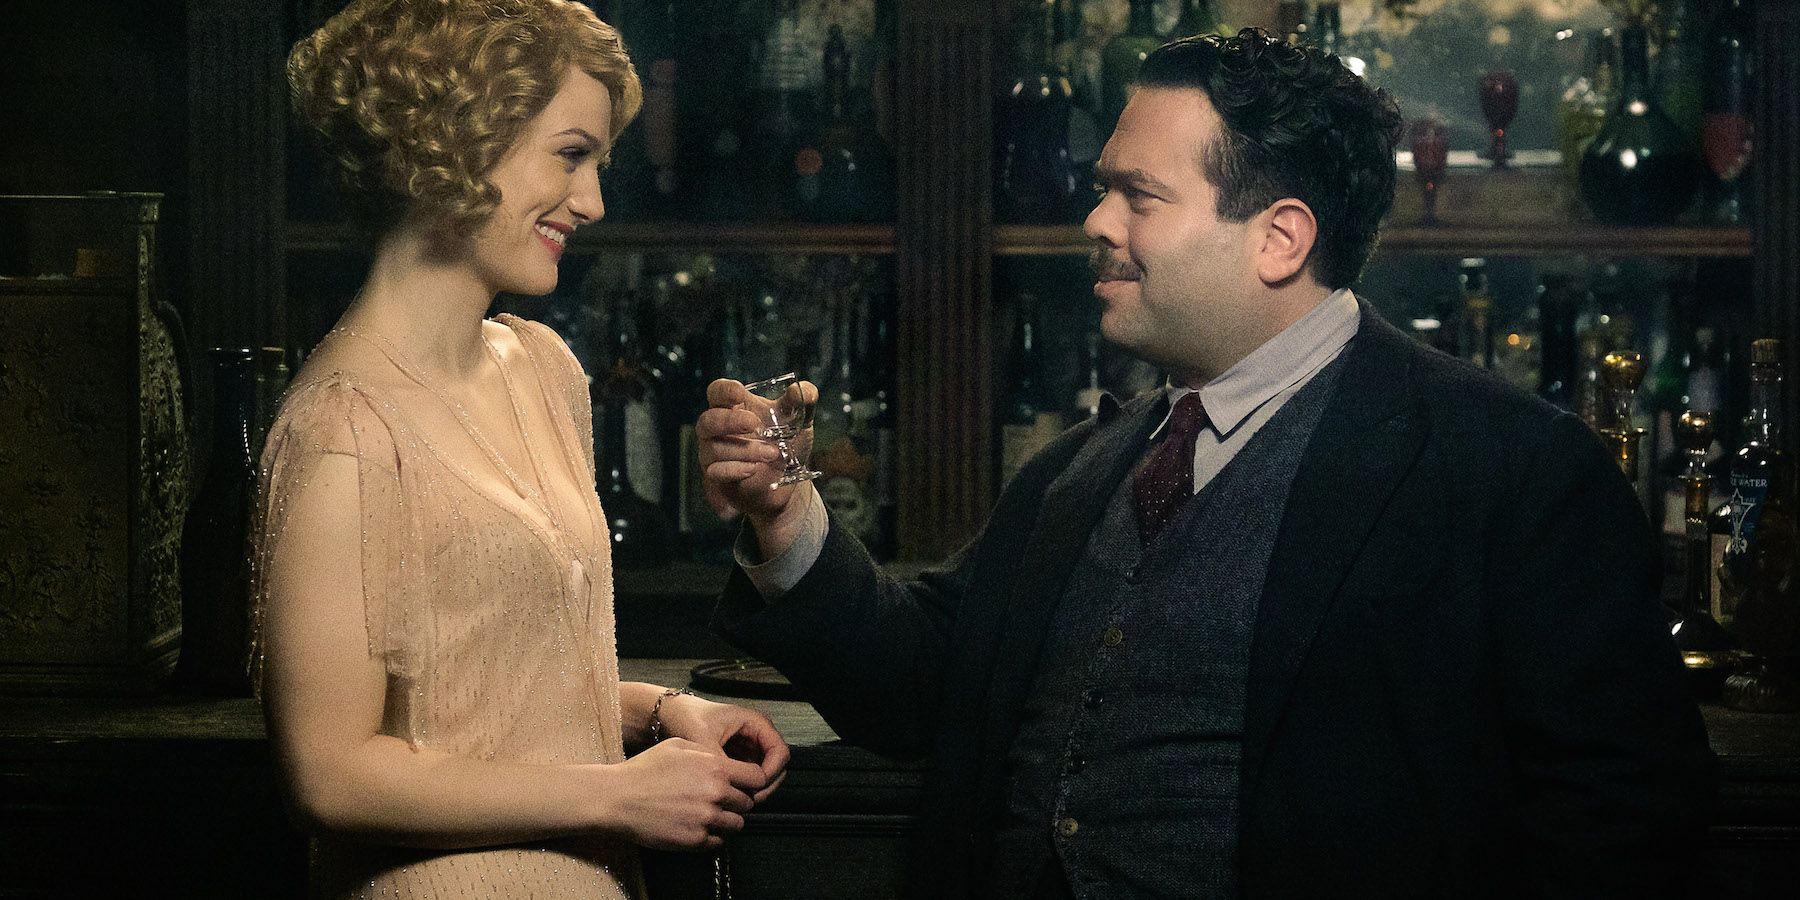 Jacob Kowalski, Dan Fogler, standing with Queenie, Alison Sudol, in Fantastic Beasts and Where to Find Them